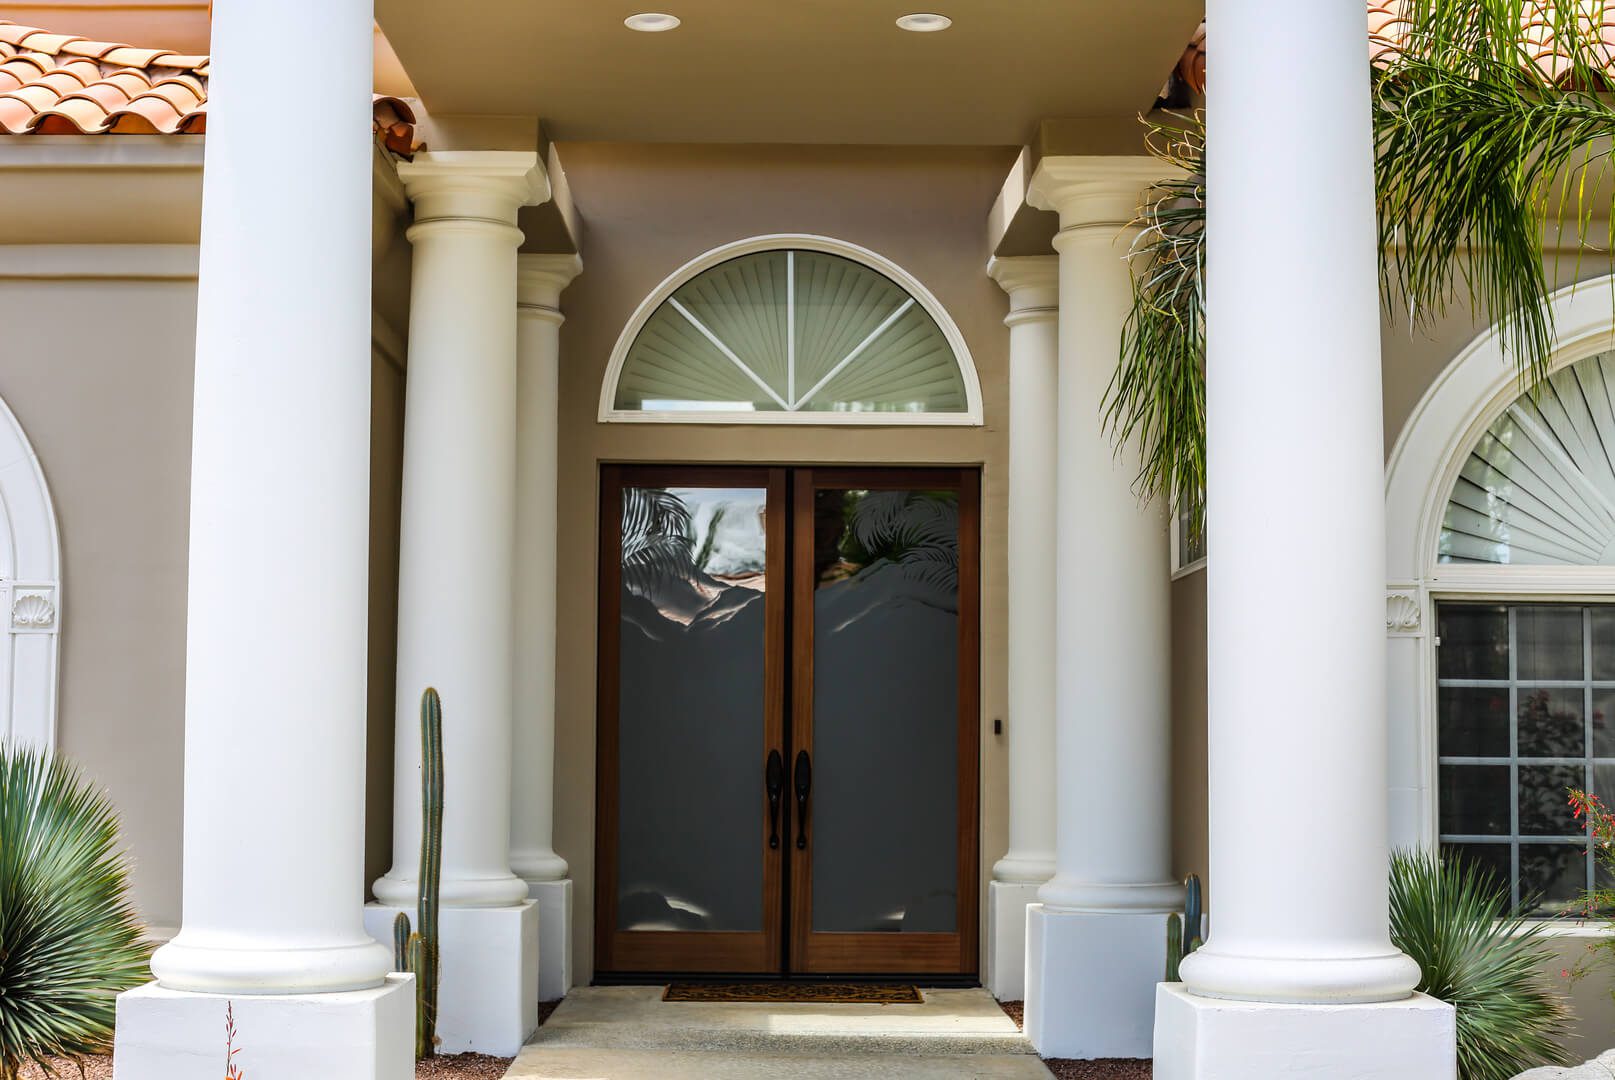 A large double door entrance to a building.